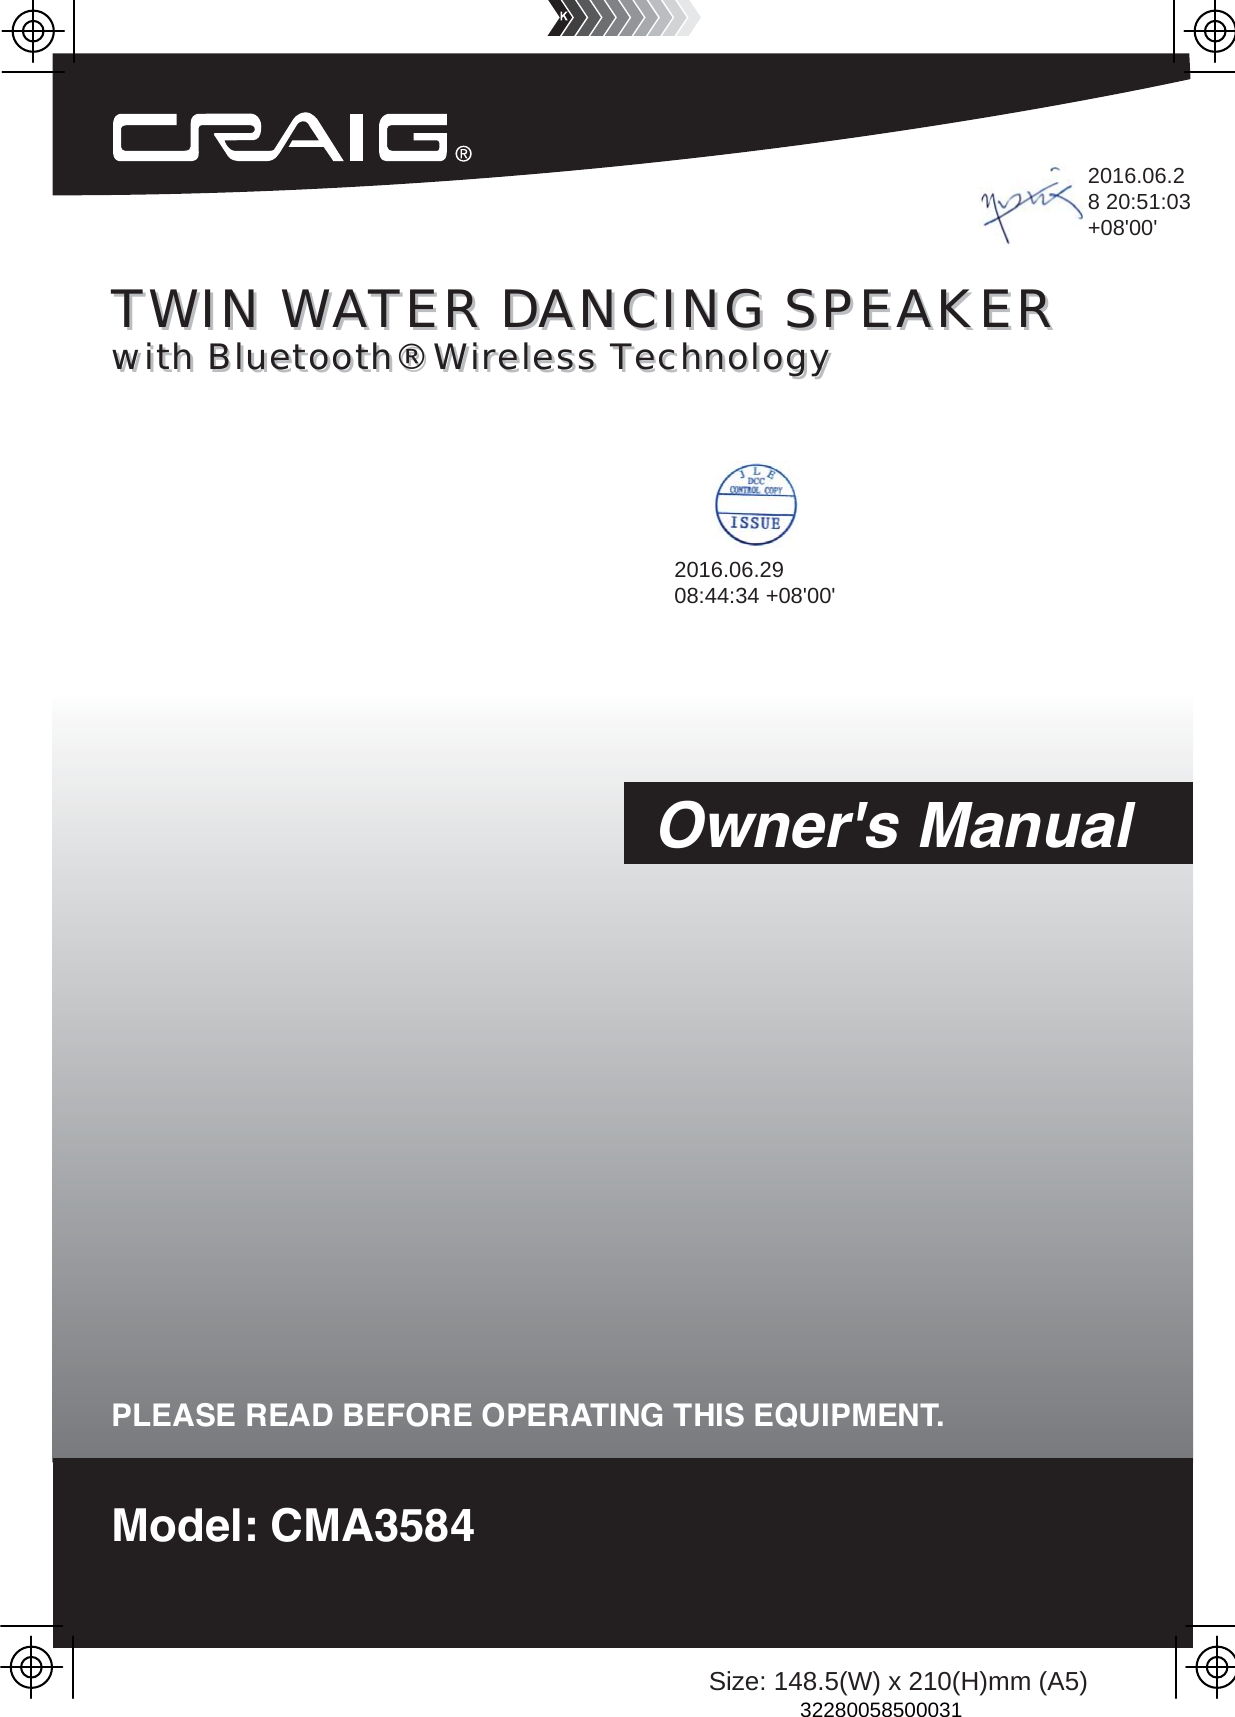 TWIN WATER DANCING SPEAKER with Bluetooth® Wireless TechnologyTWIN WATER DANCING SPEAKER with Bluetooth® Wireless TechnologyModel: CMA3584PLEASE READ BEFORE OPERATING THIS EQUIPMENT.Owner&apos;s ManualSize: 148.5(W) x 210(H)mm (A5)322800585000312016.06.28 20:51:03+08&apos;00&apos;2016.06.2908:44:34 +08&apos;00&apos;